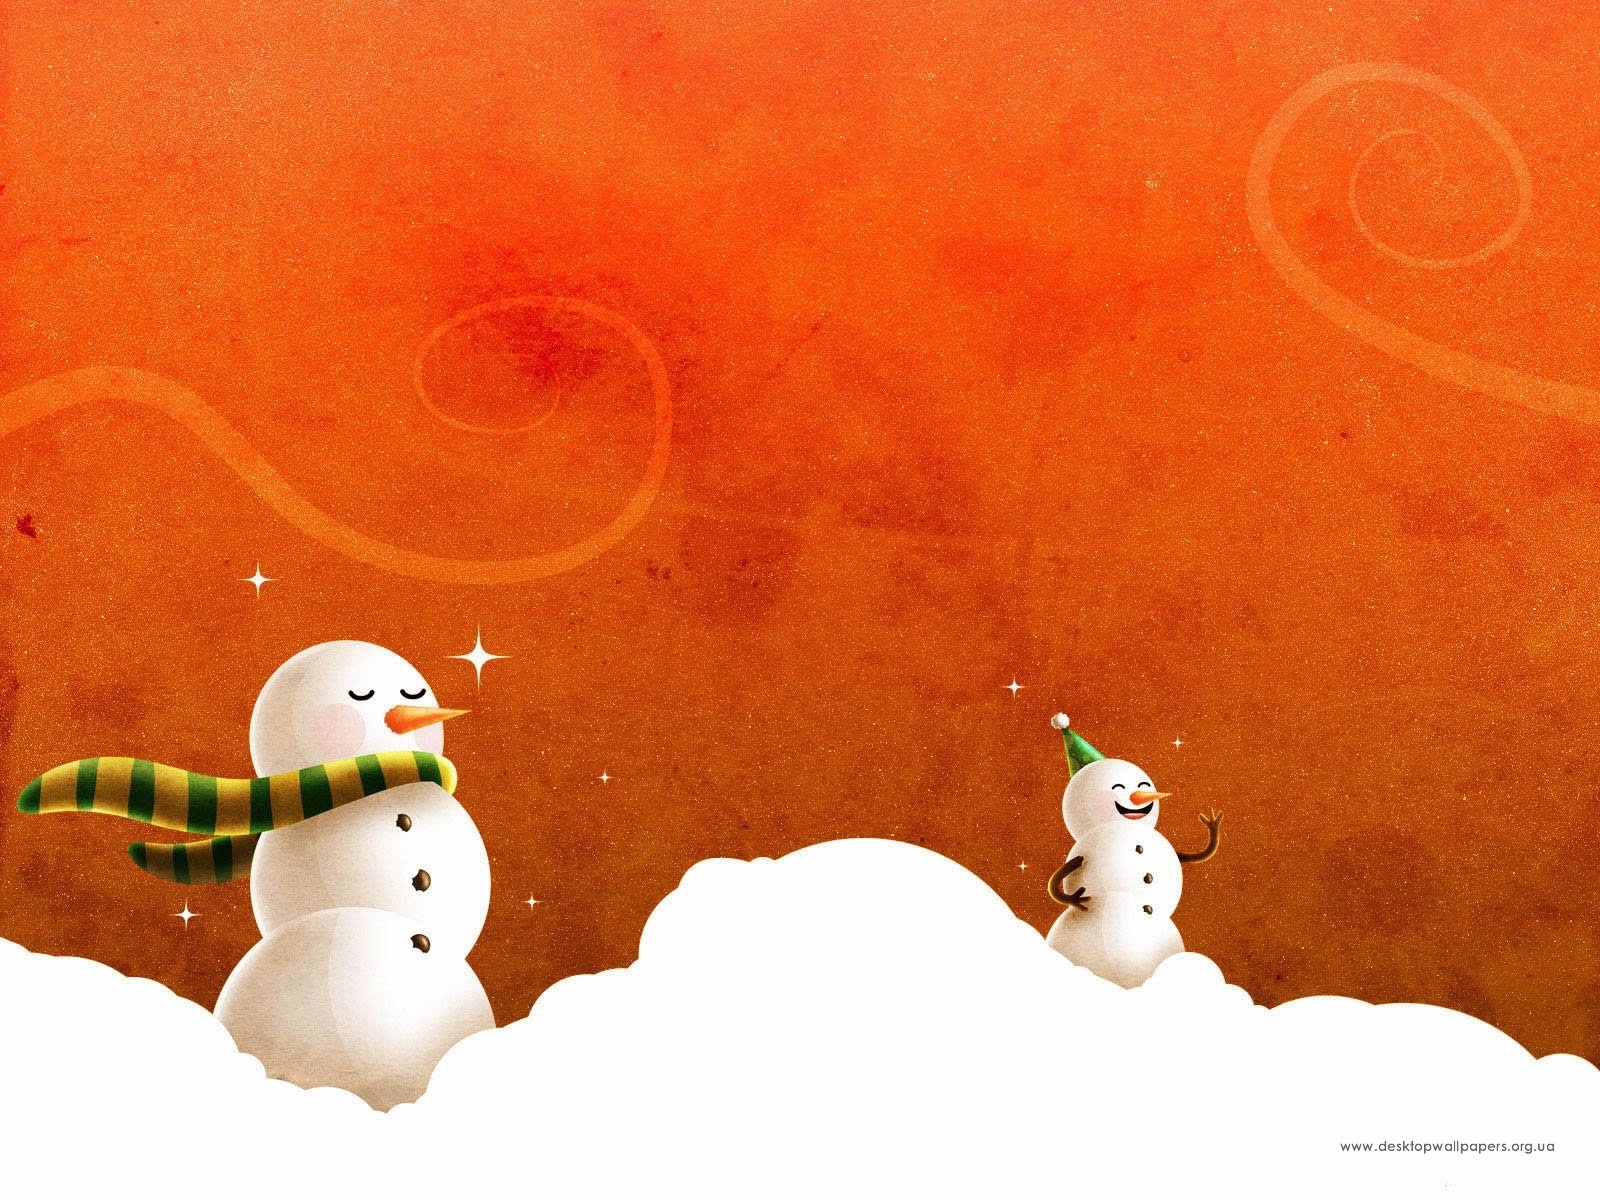 winter, new year, christmas, xmas, pictures, orange High Definition image